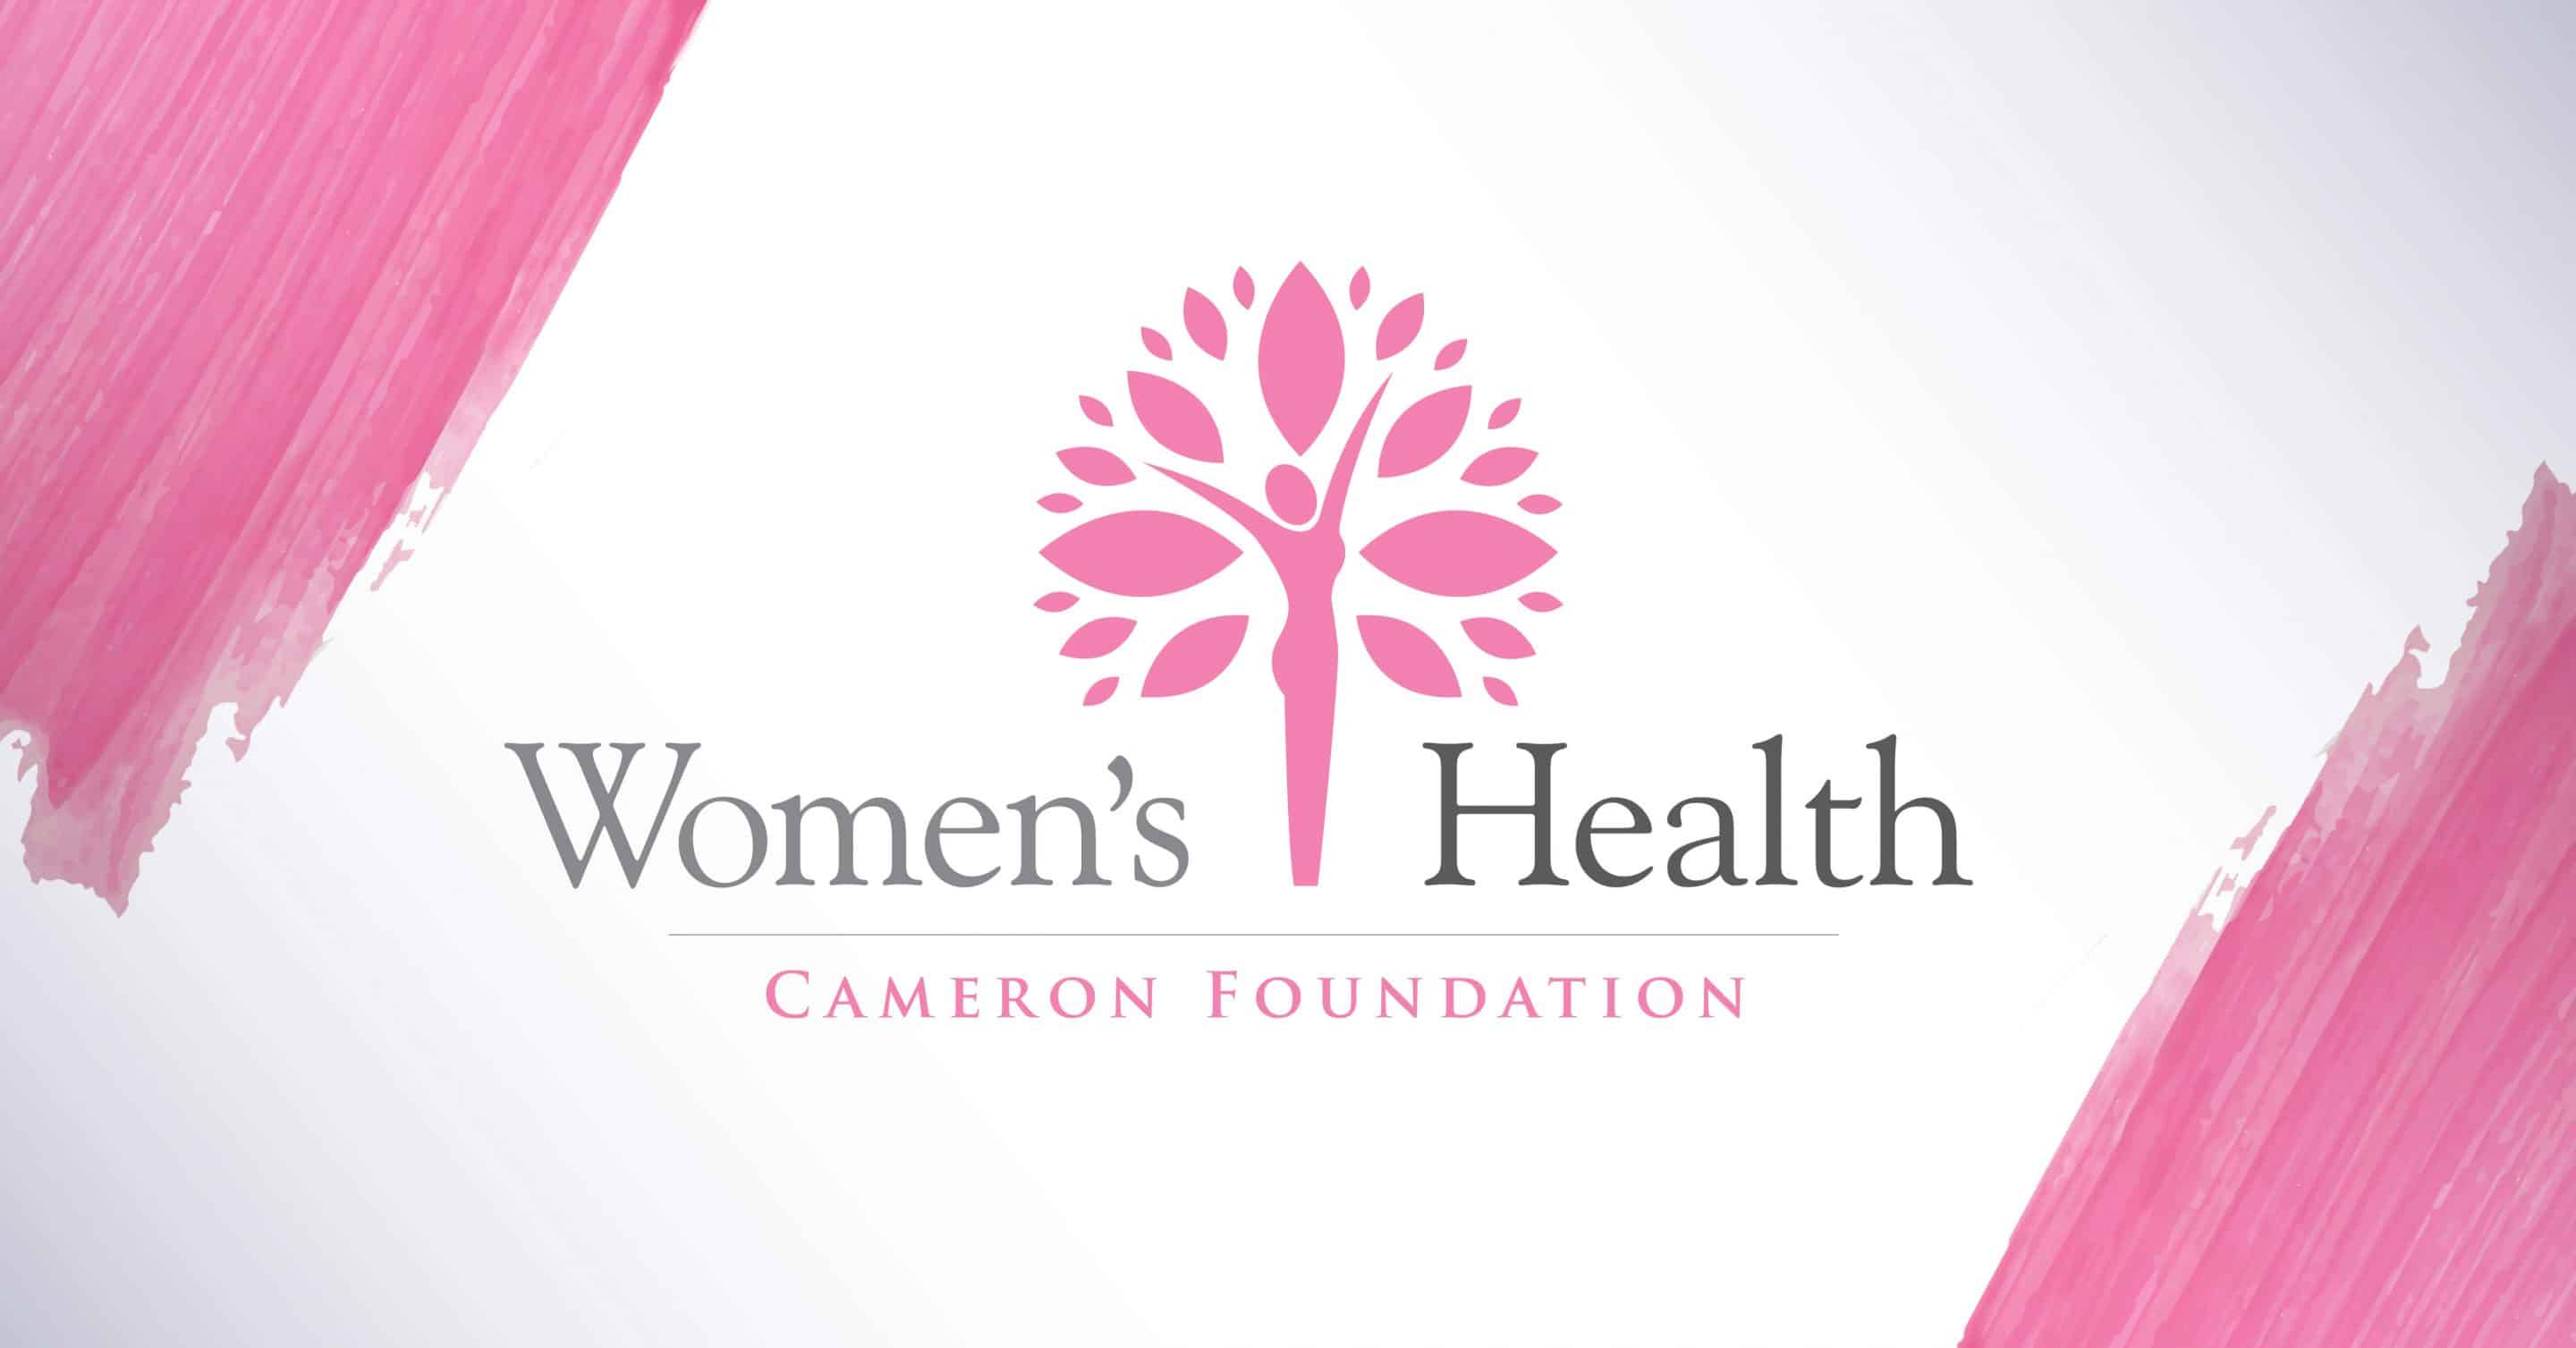 The Cameron Foundation is focused on Women's Health